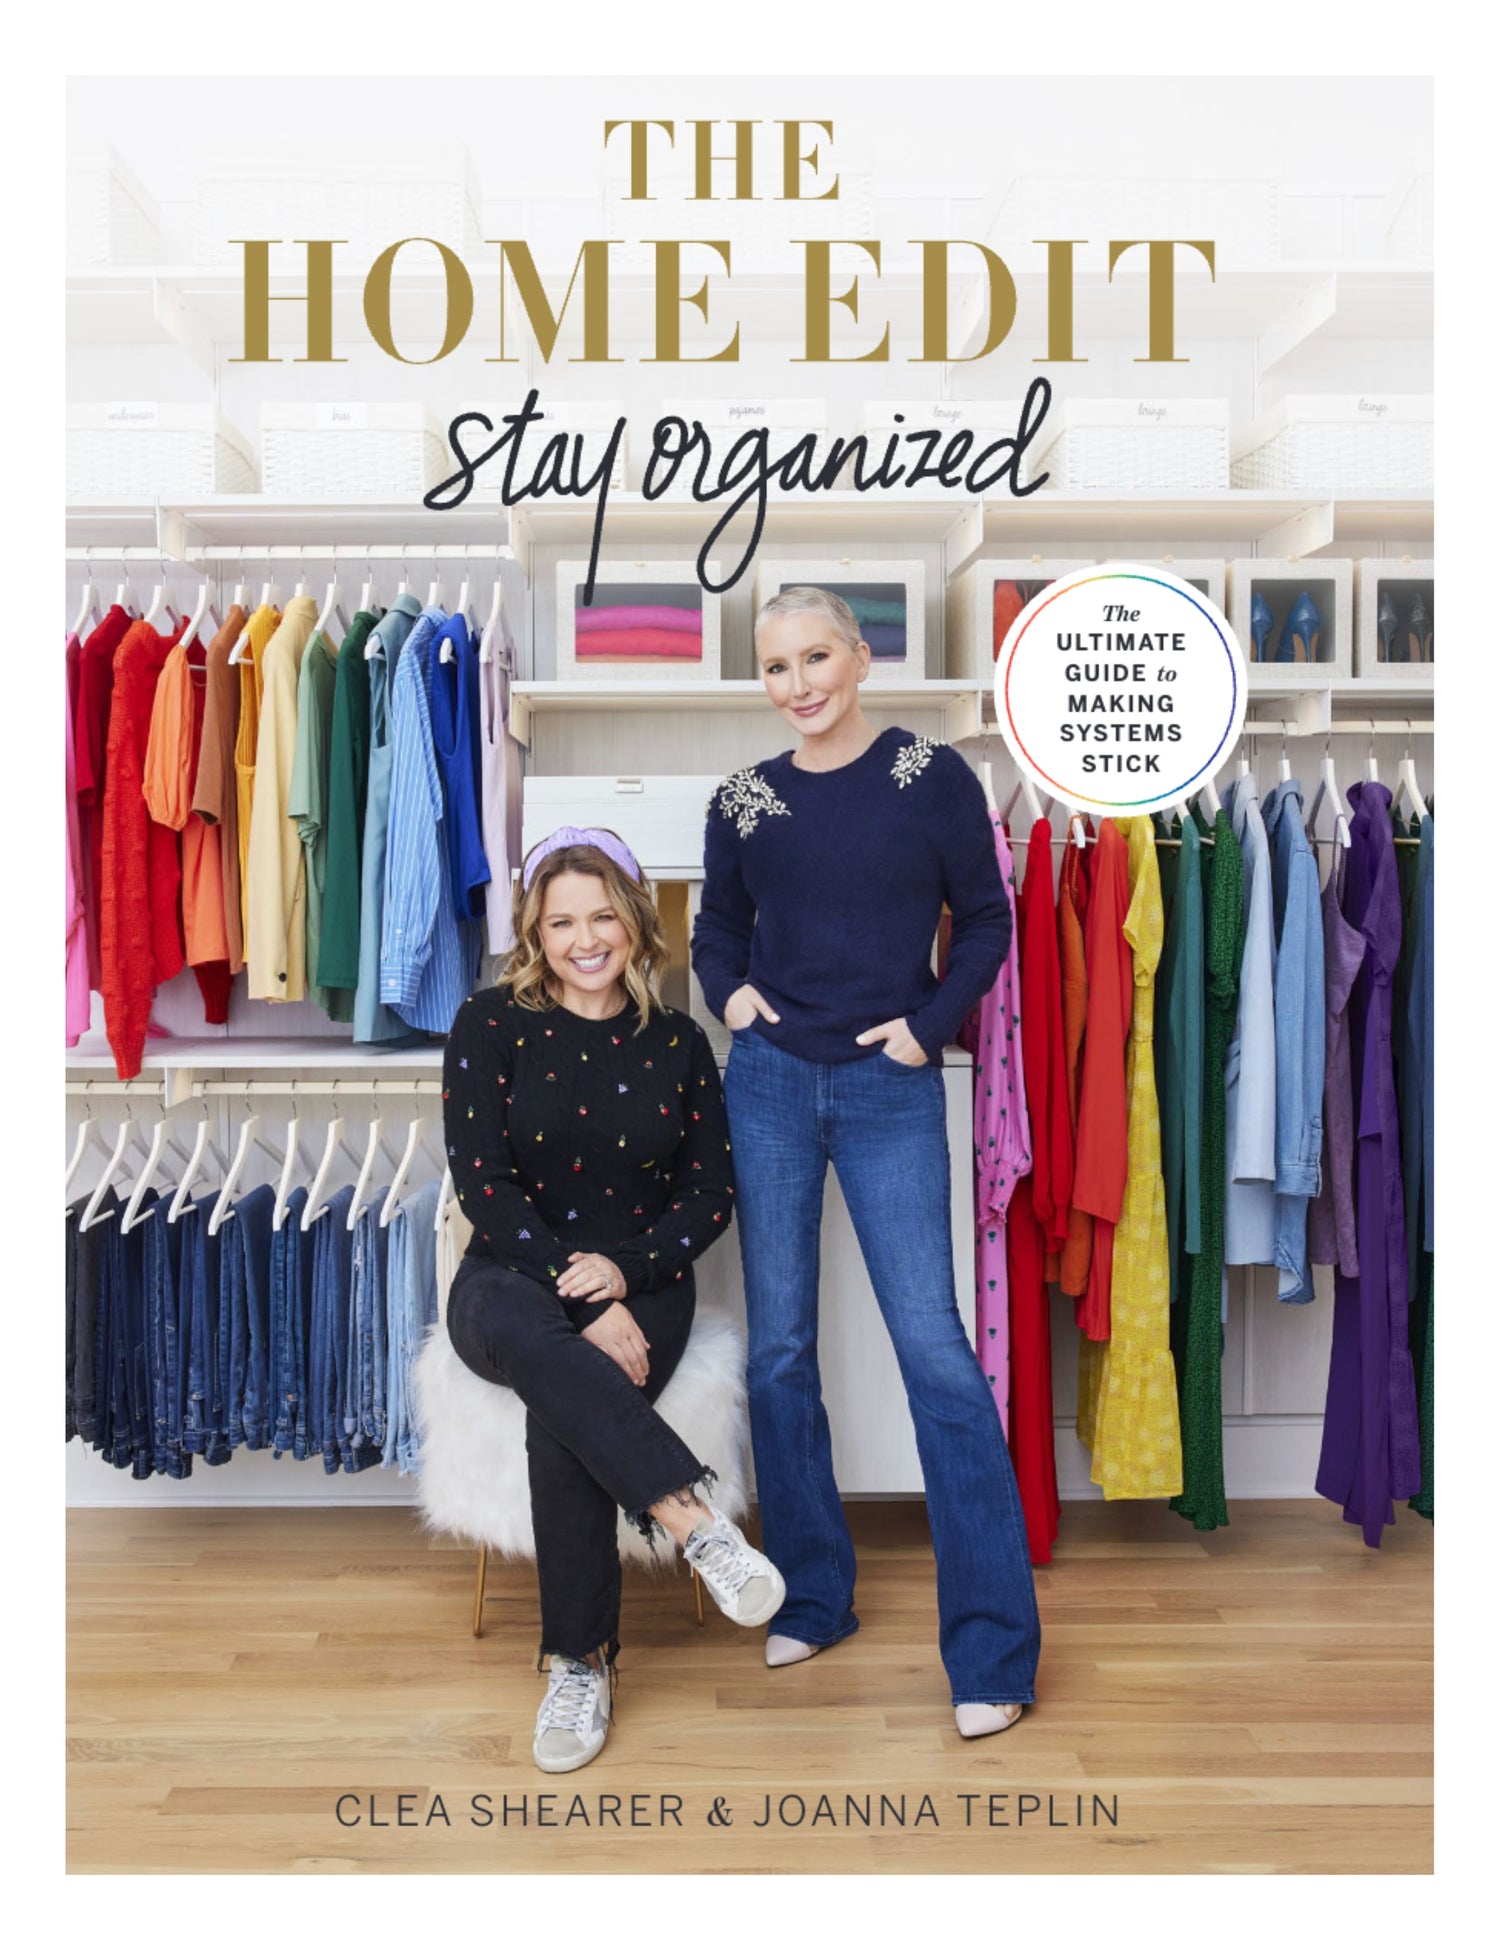 How Do You Get on 'The Home Edit'? You Can Also Hire the Team